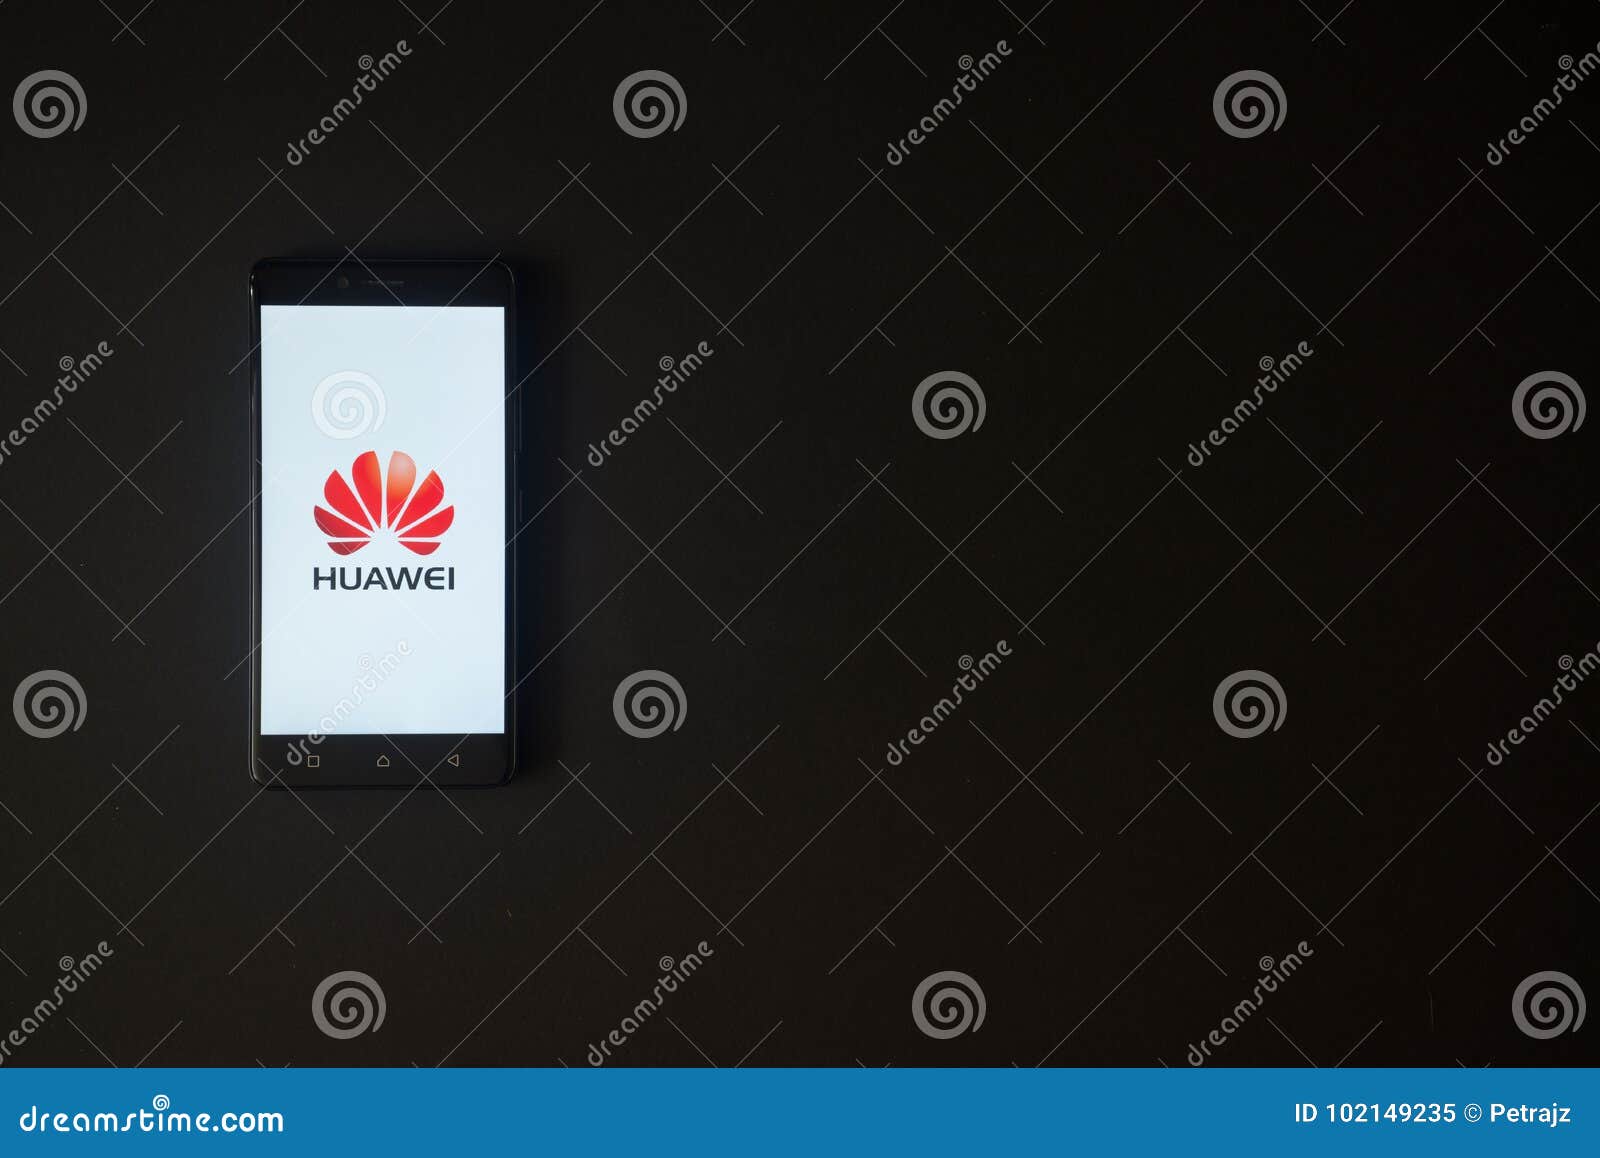 Huawei Logo On Smartphone Screen On Black Background Editorial